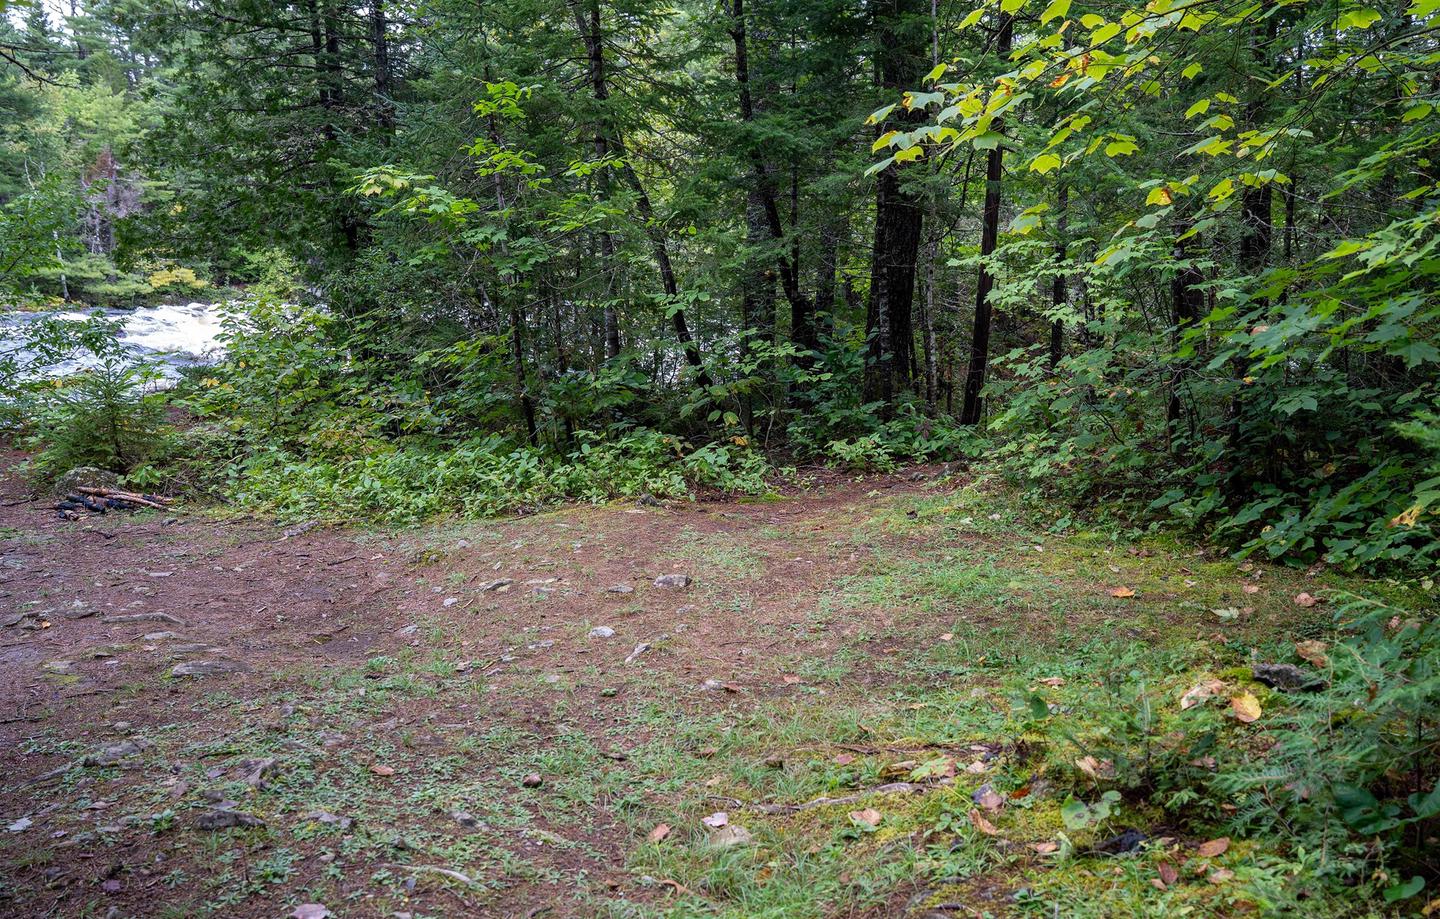 A fairly leveled dirt and gravel surface with grass is available for placing a tent. The river is visible in the background with the dense forest surrounding the campsite.The campsite has a mostly leveled ground to set up a tent.